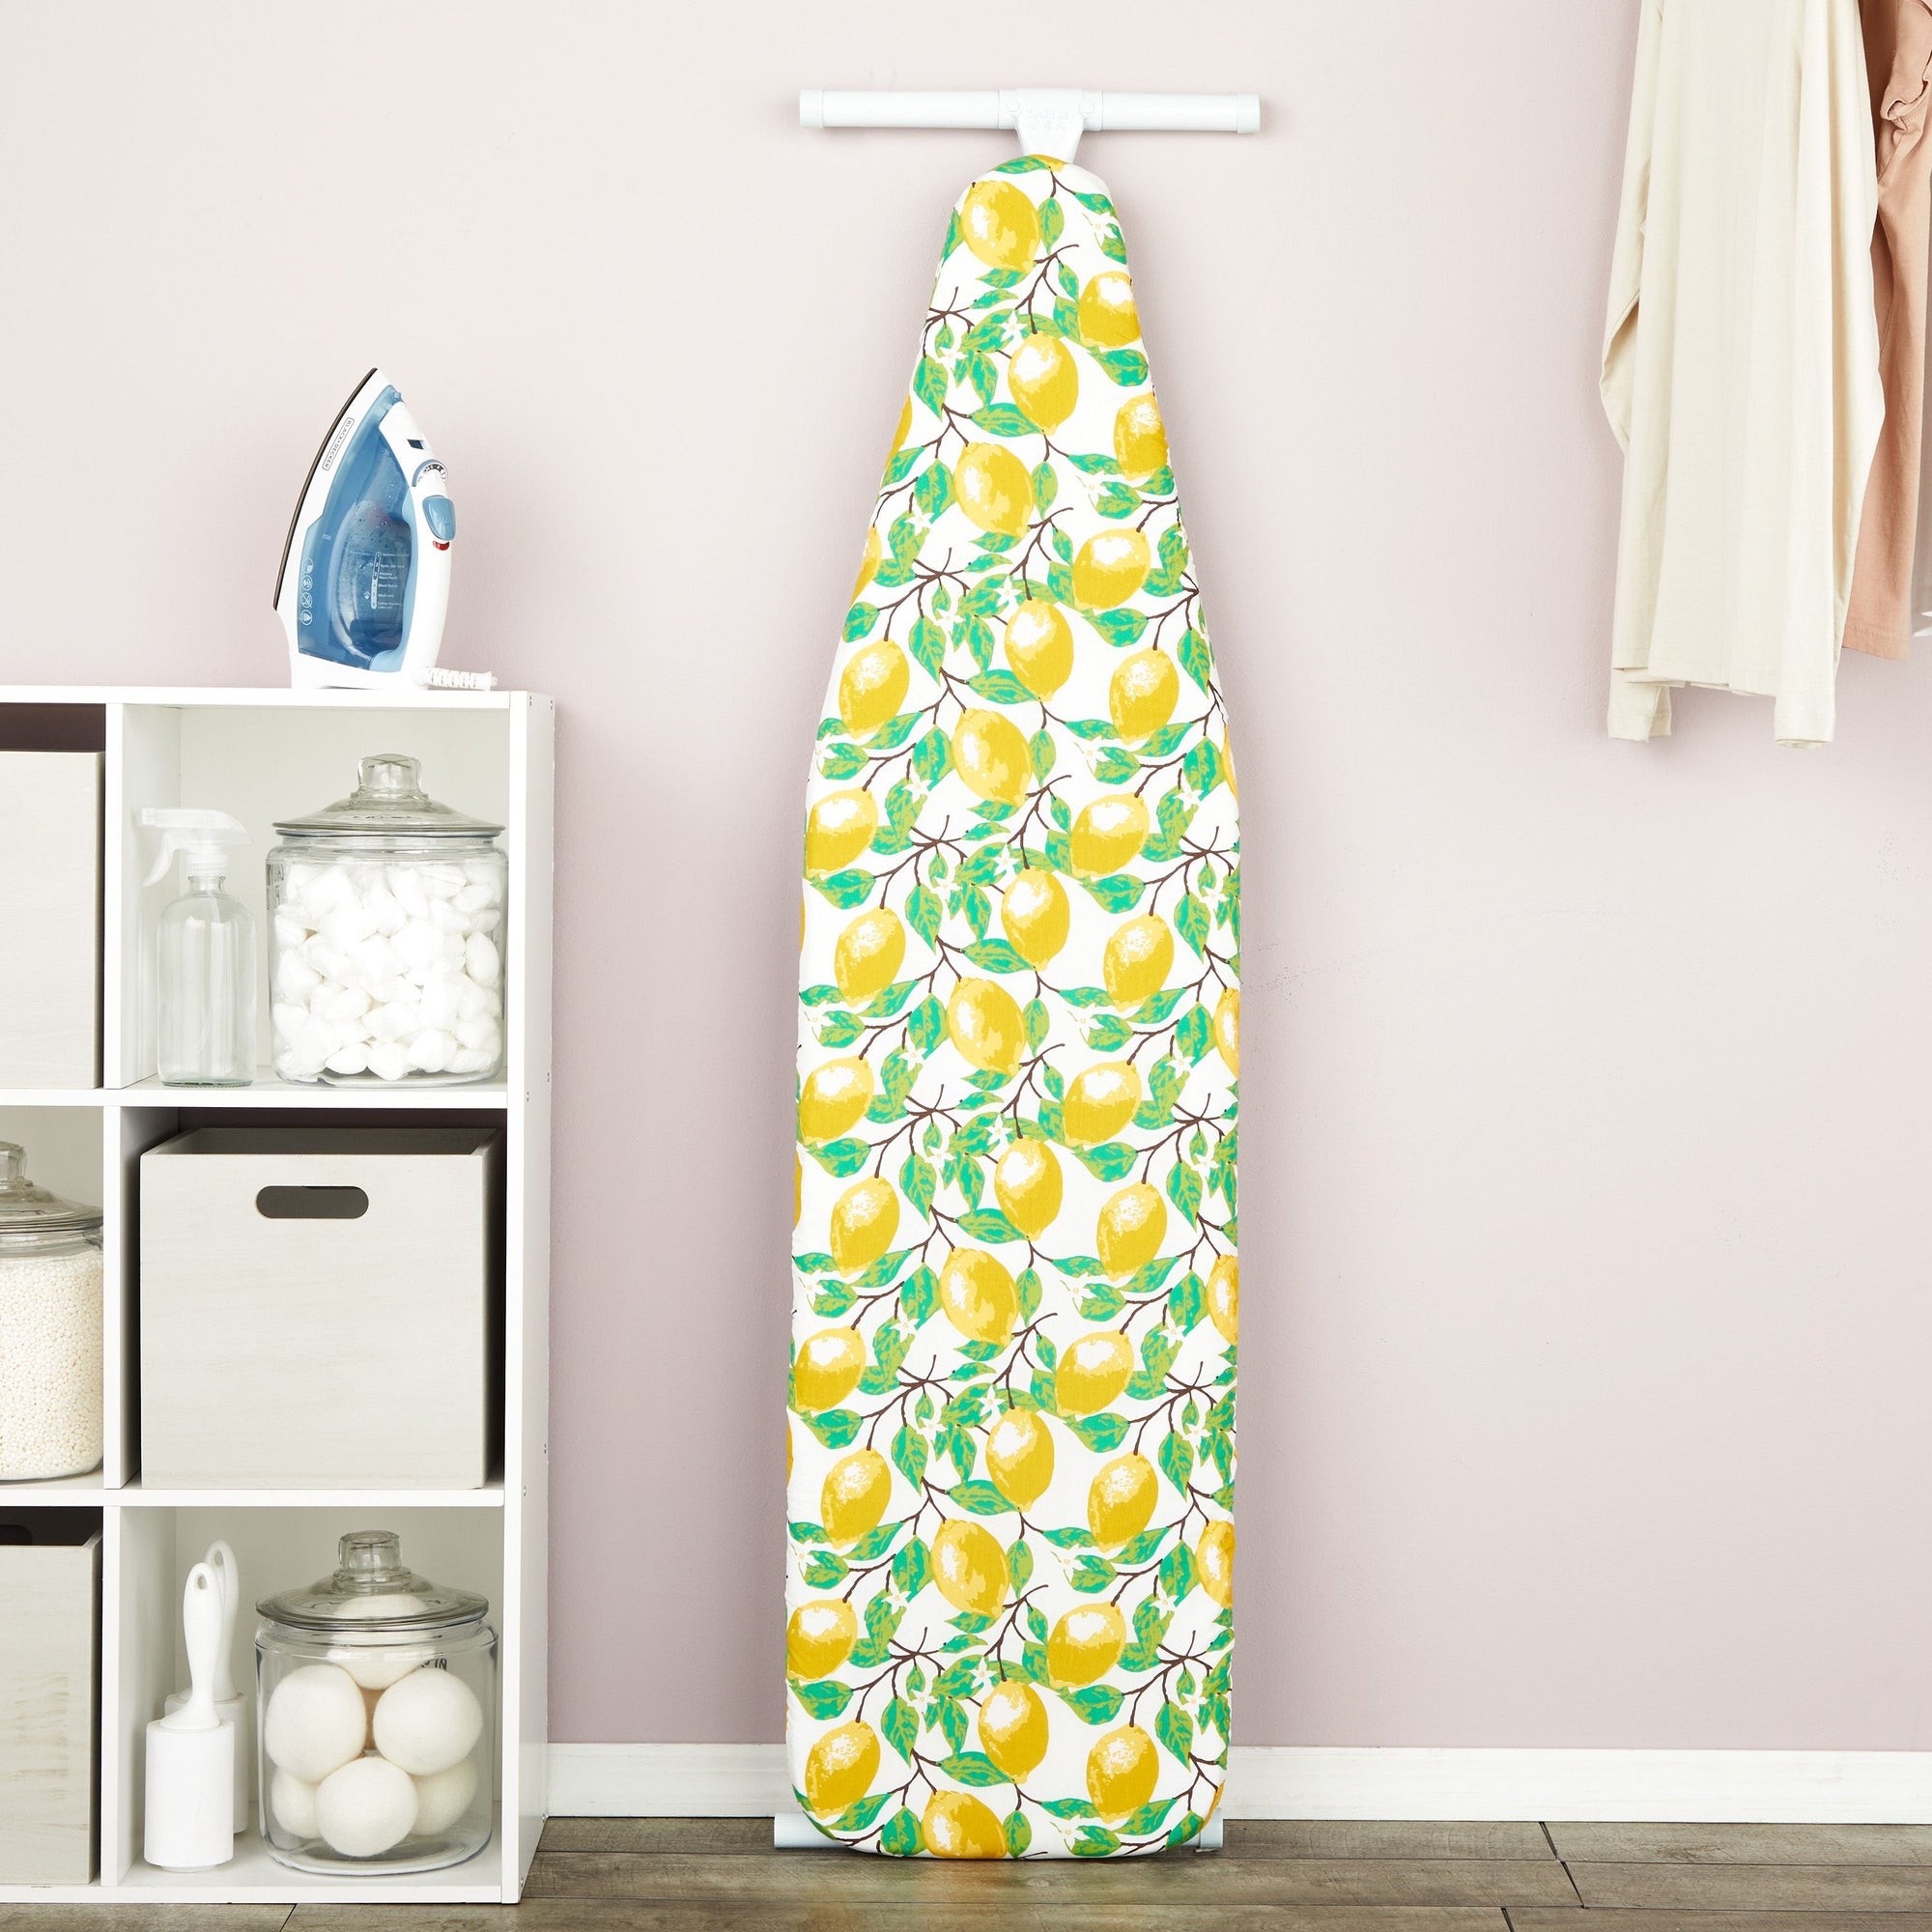 Ironing Board Covers